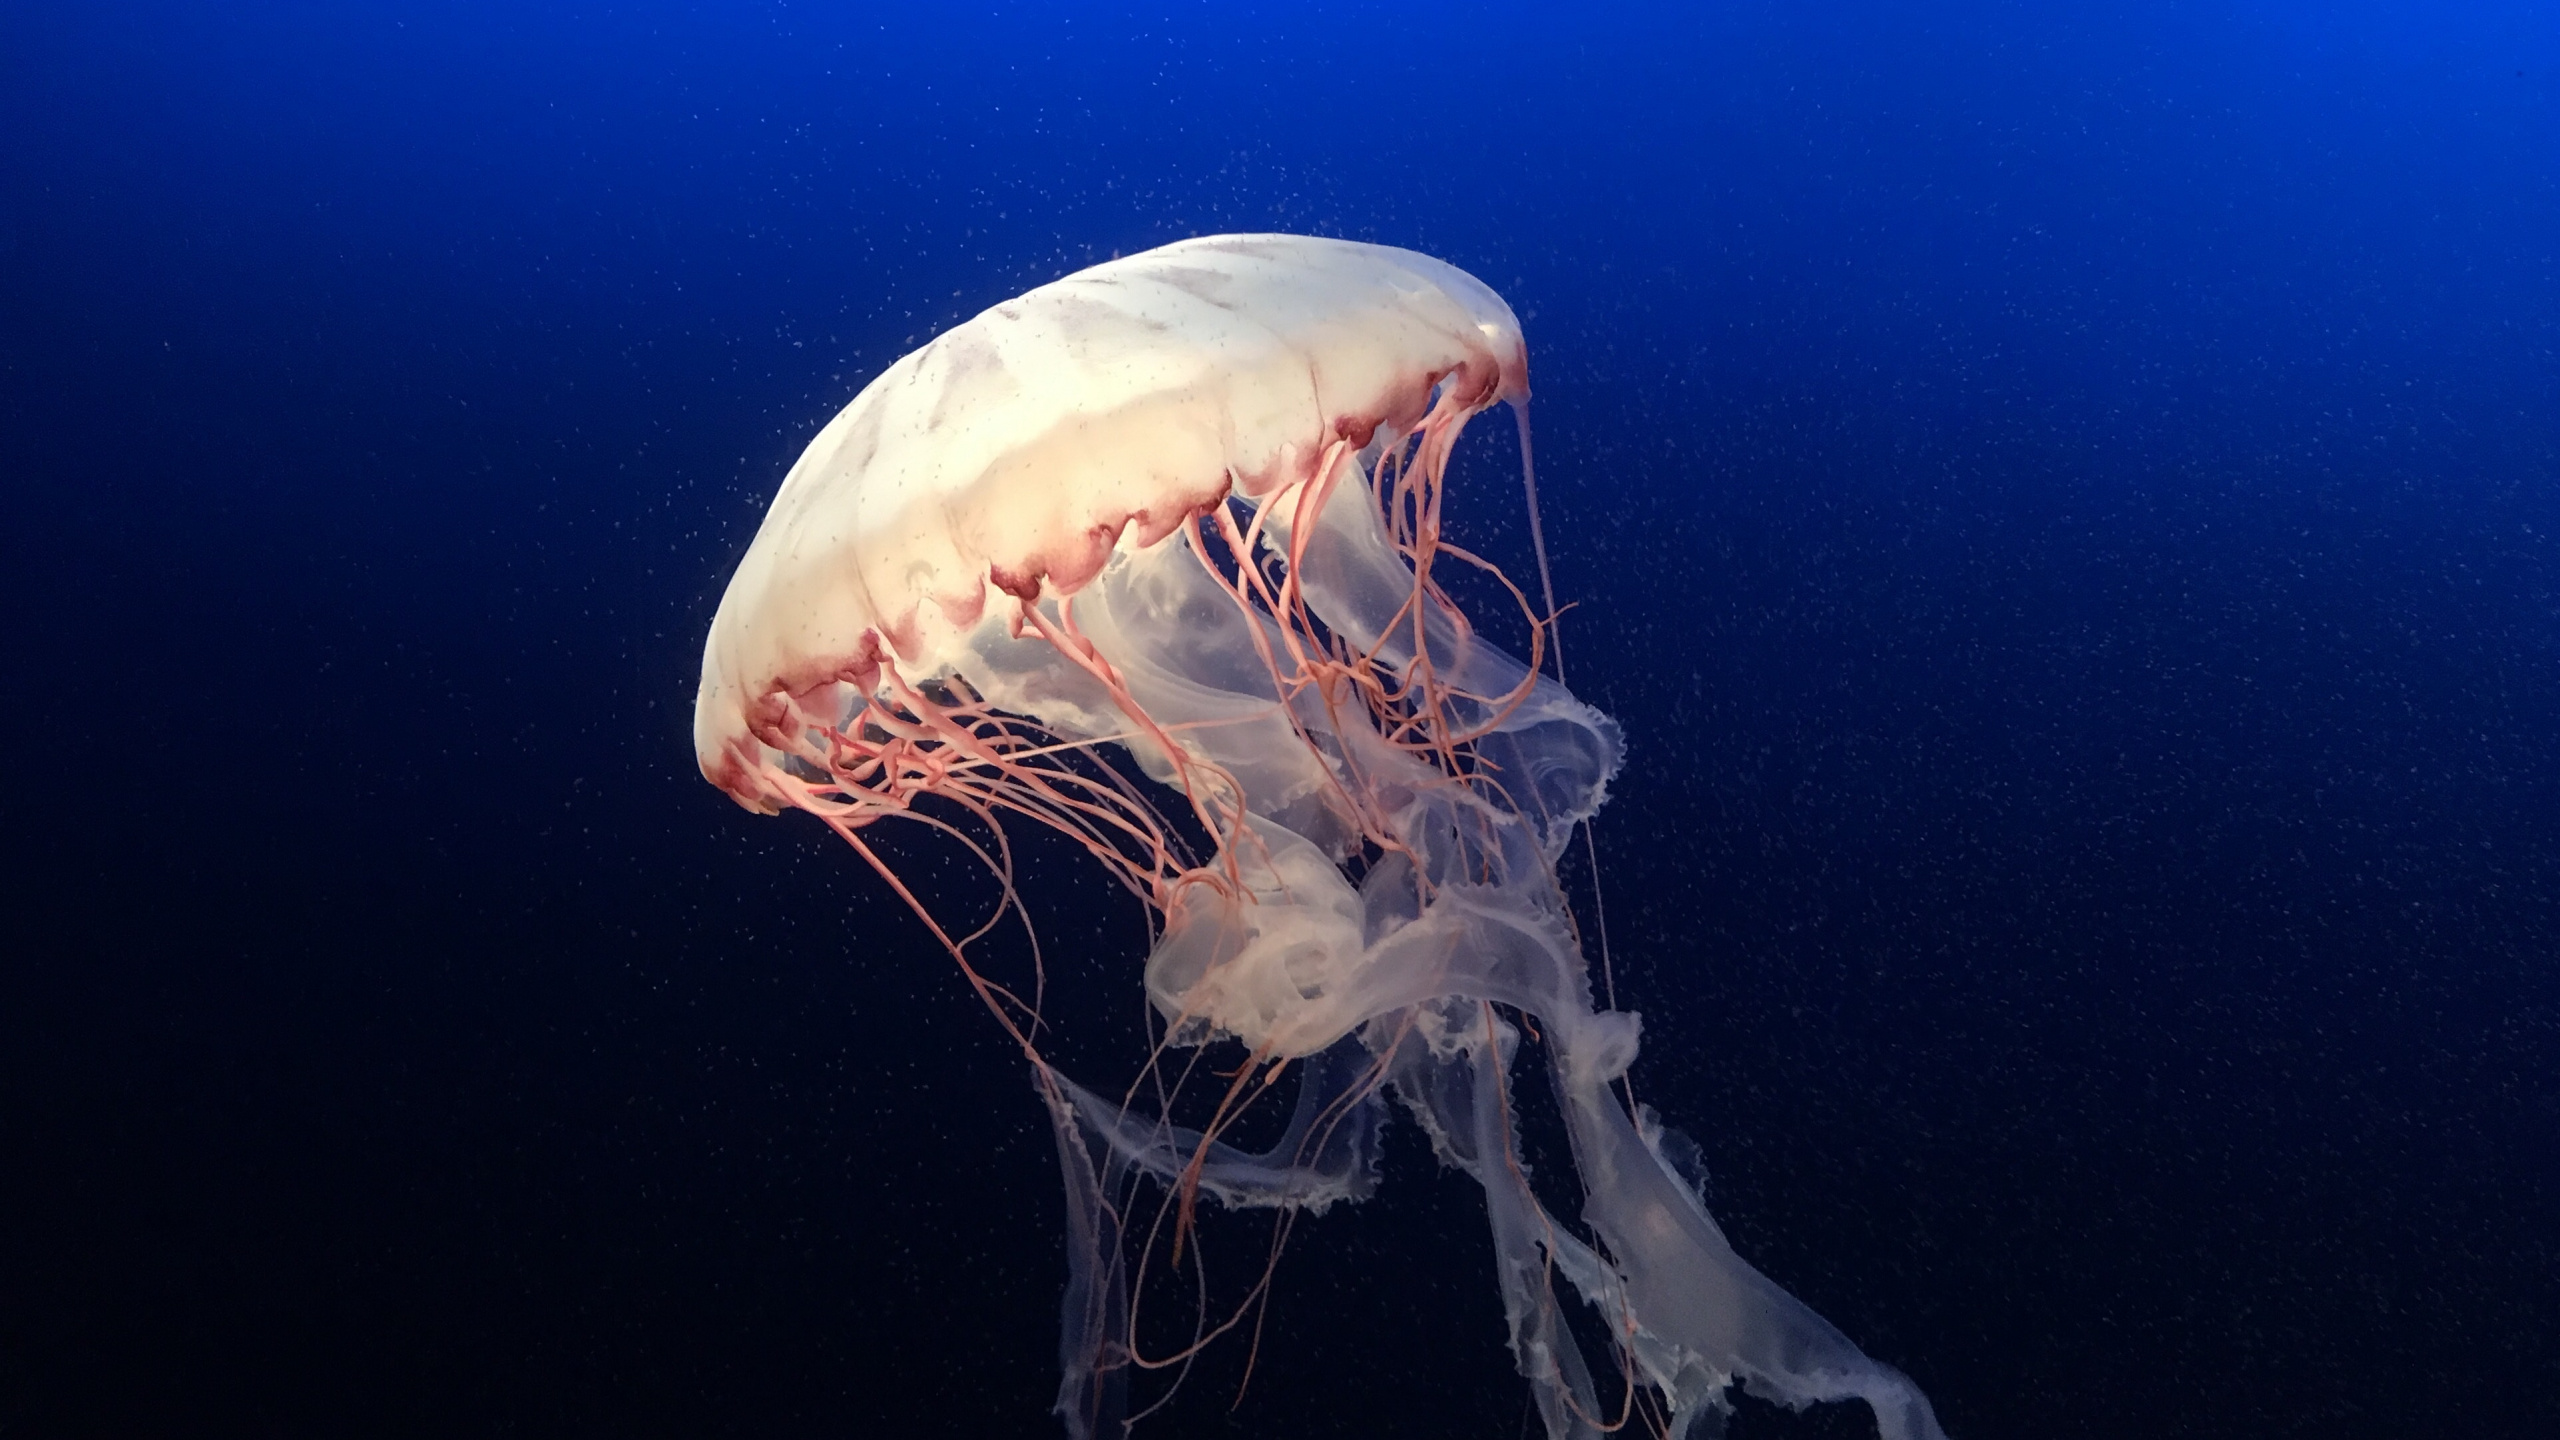 White Jellyfish in Blue Water. Wallpaper in 2560x1440 Resolution